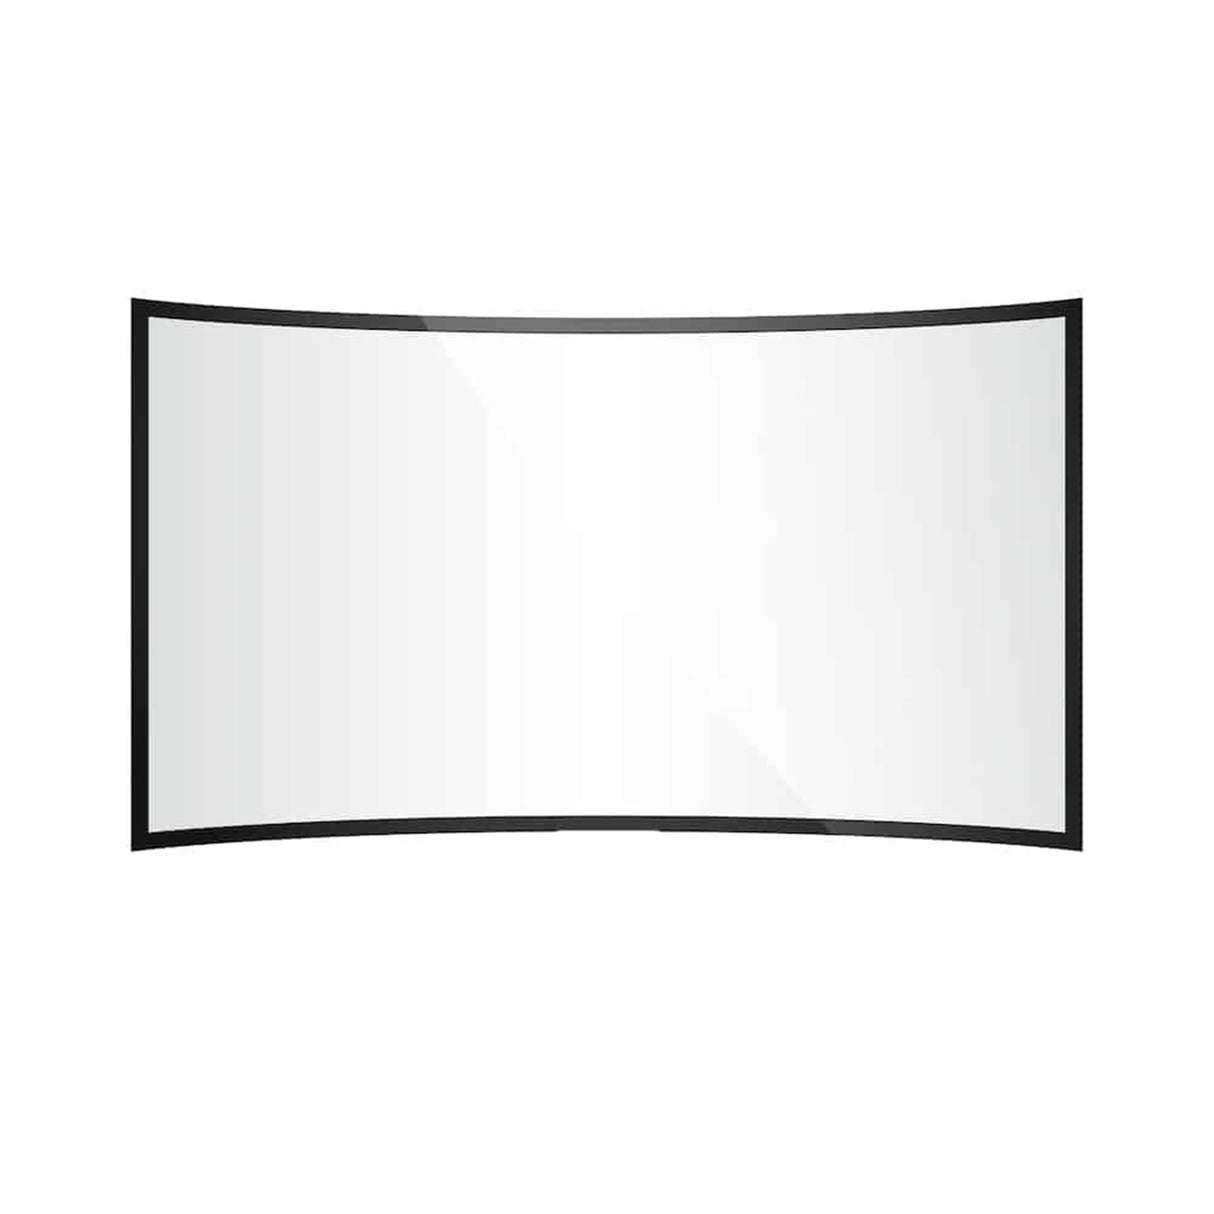 RNT Screen SableFrame Fixed Frame Curve Projection Screen 100'' (16:9) (Matte White)